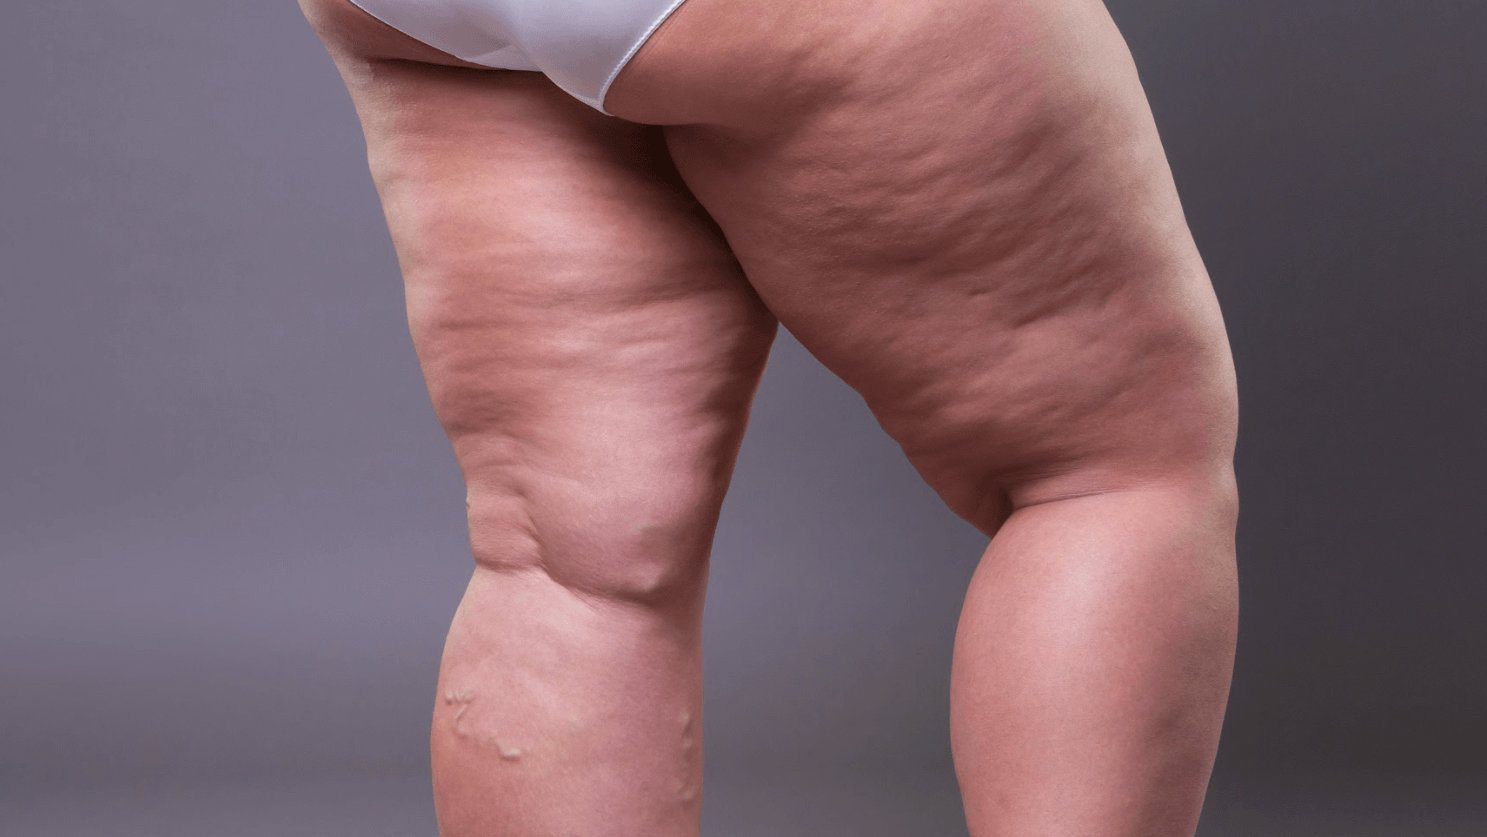 Does Thigh Liposuction Get Rid Of Cellulite?